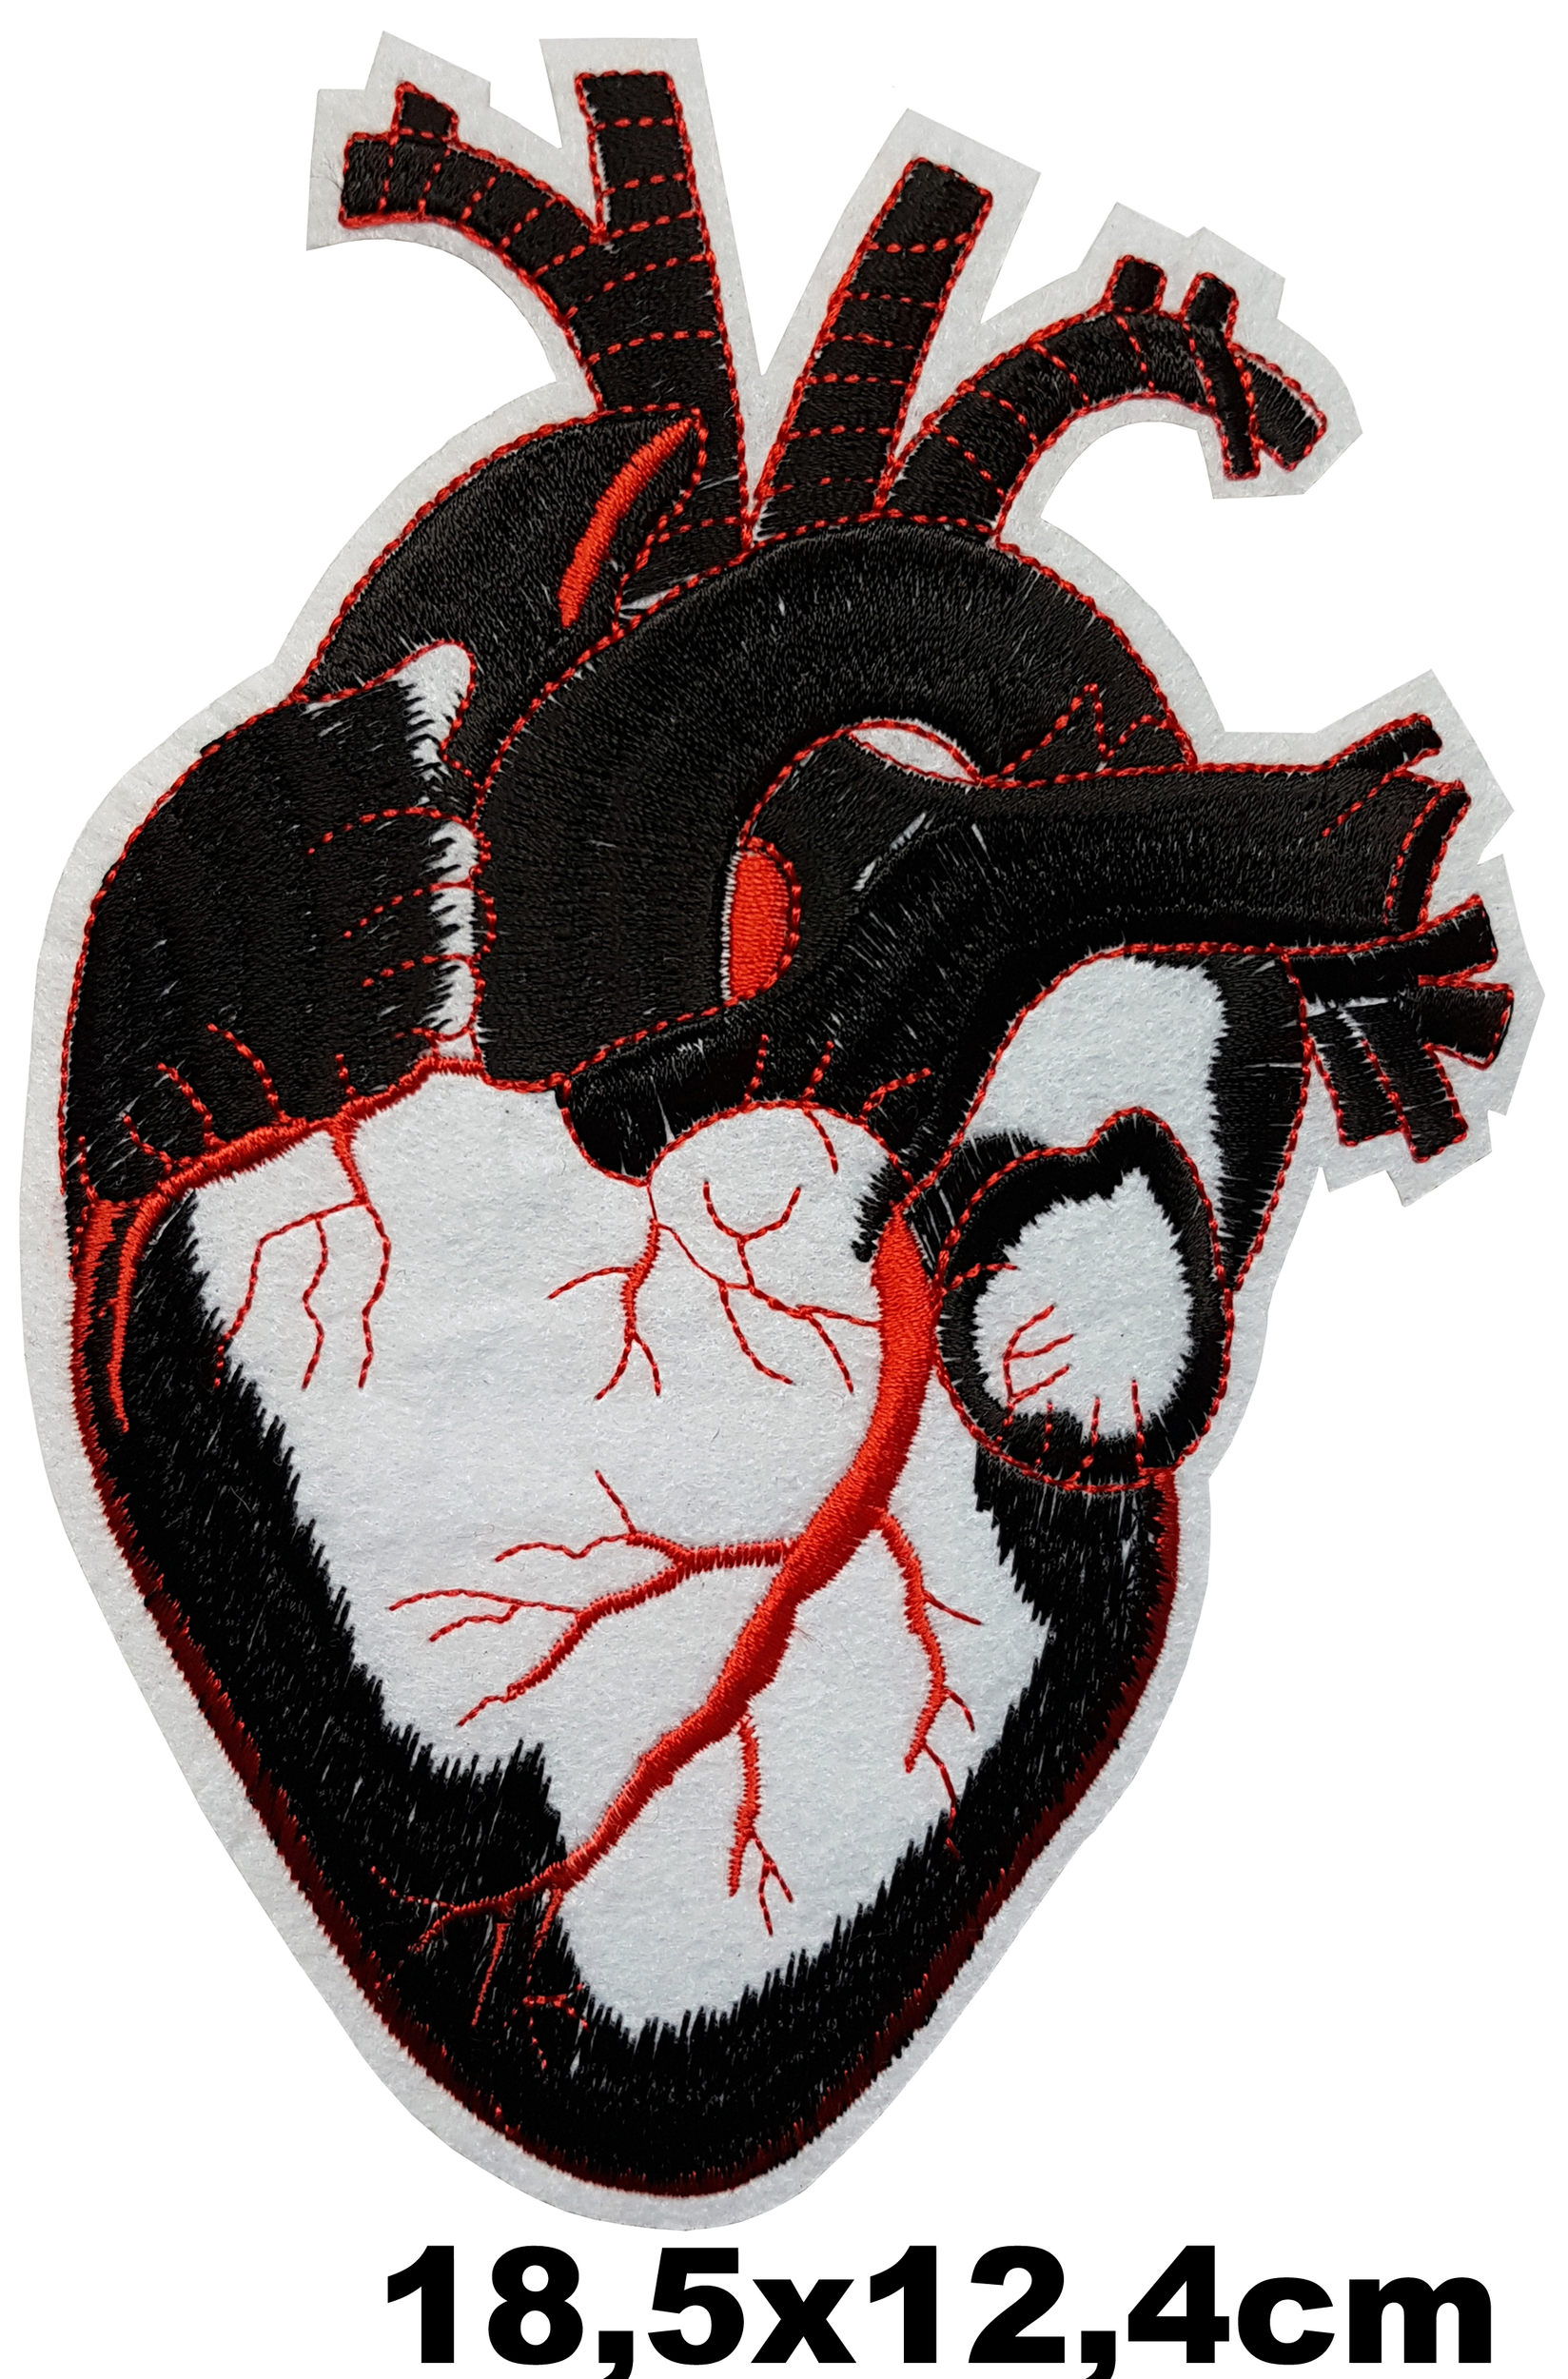 Grand Patch Thermocollant Coeur Veines Grand Patch Thermocollant Coeur Veines Noires